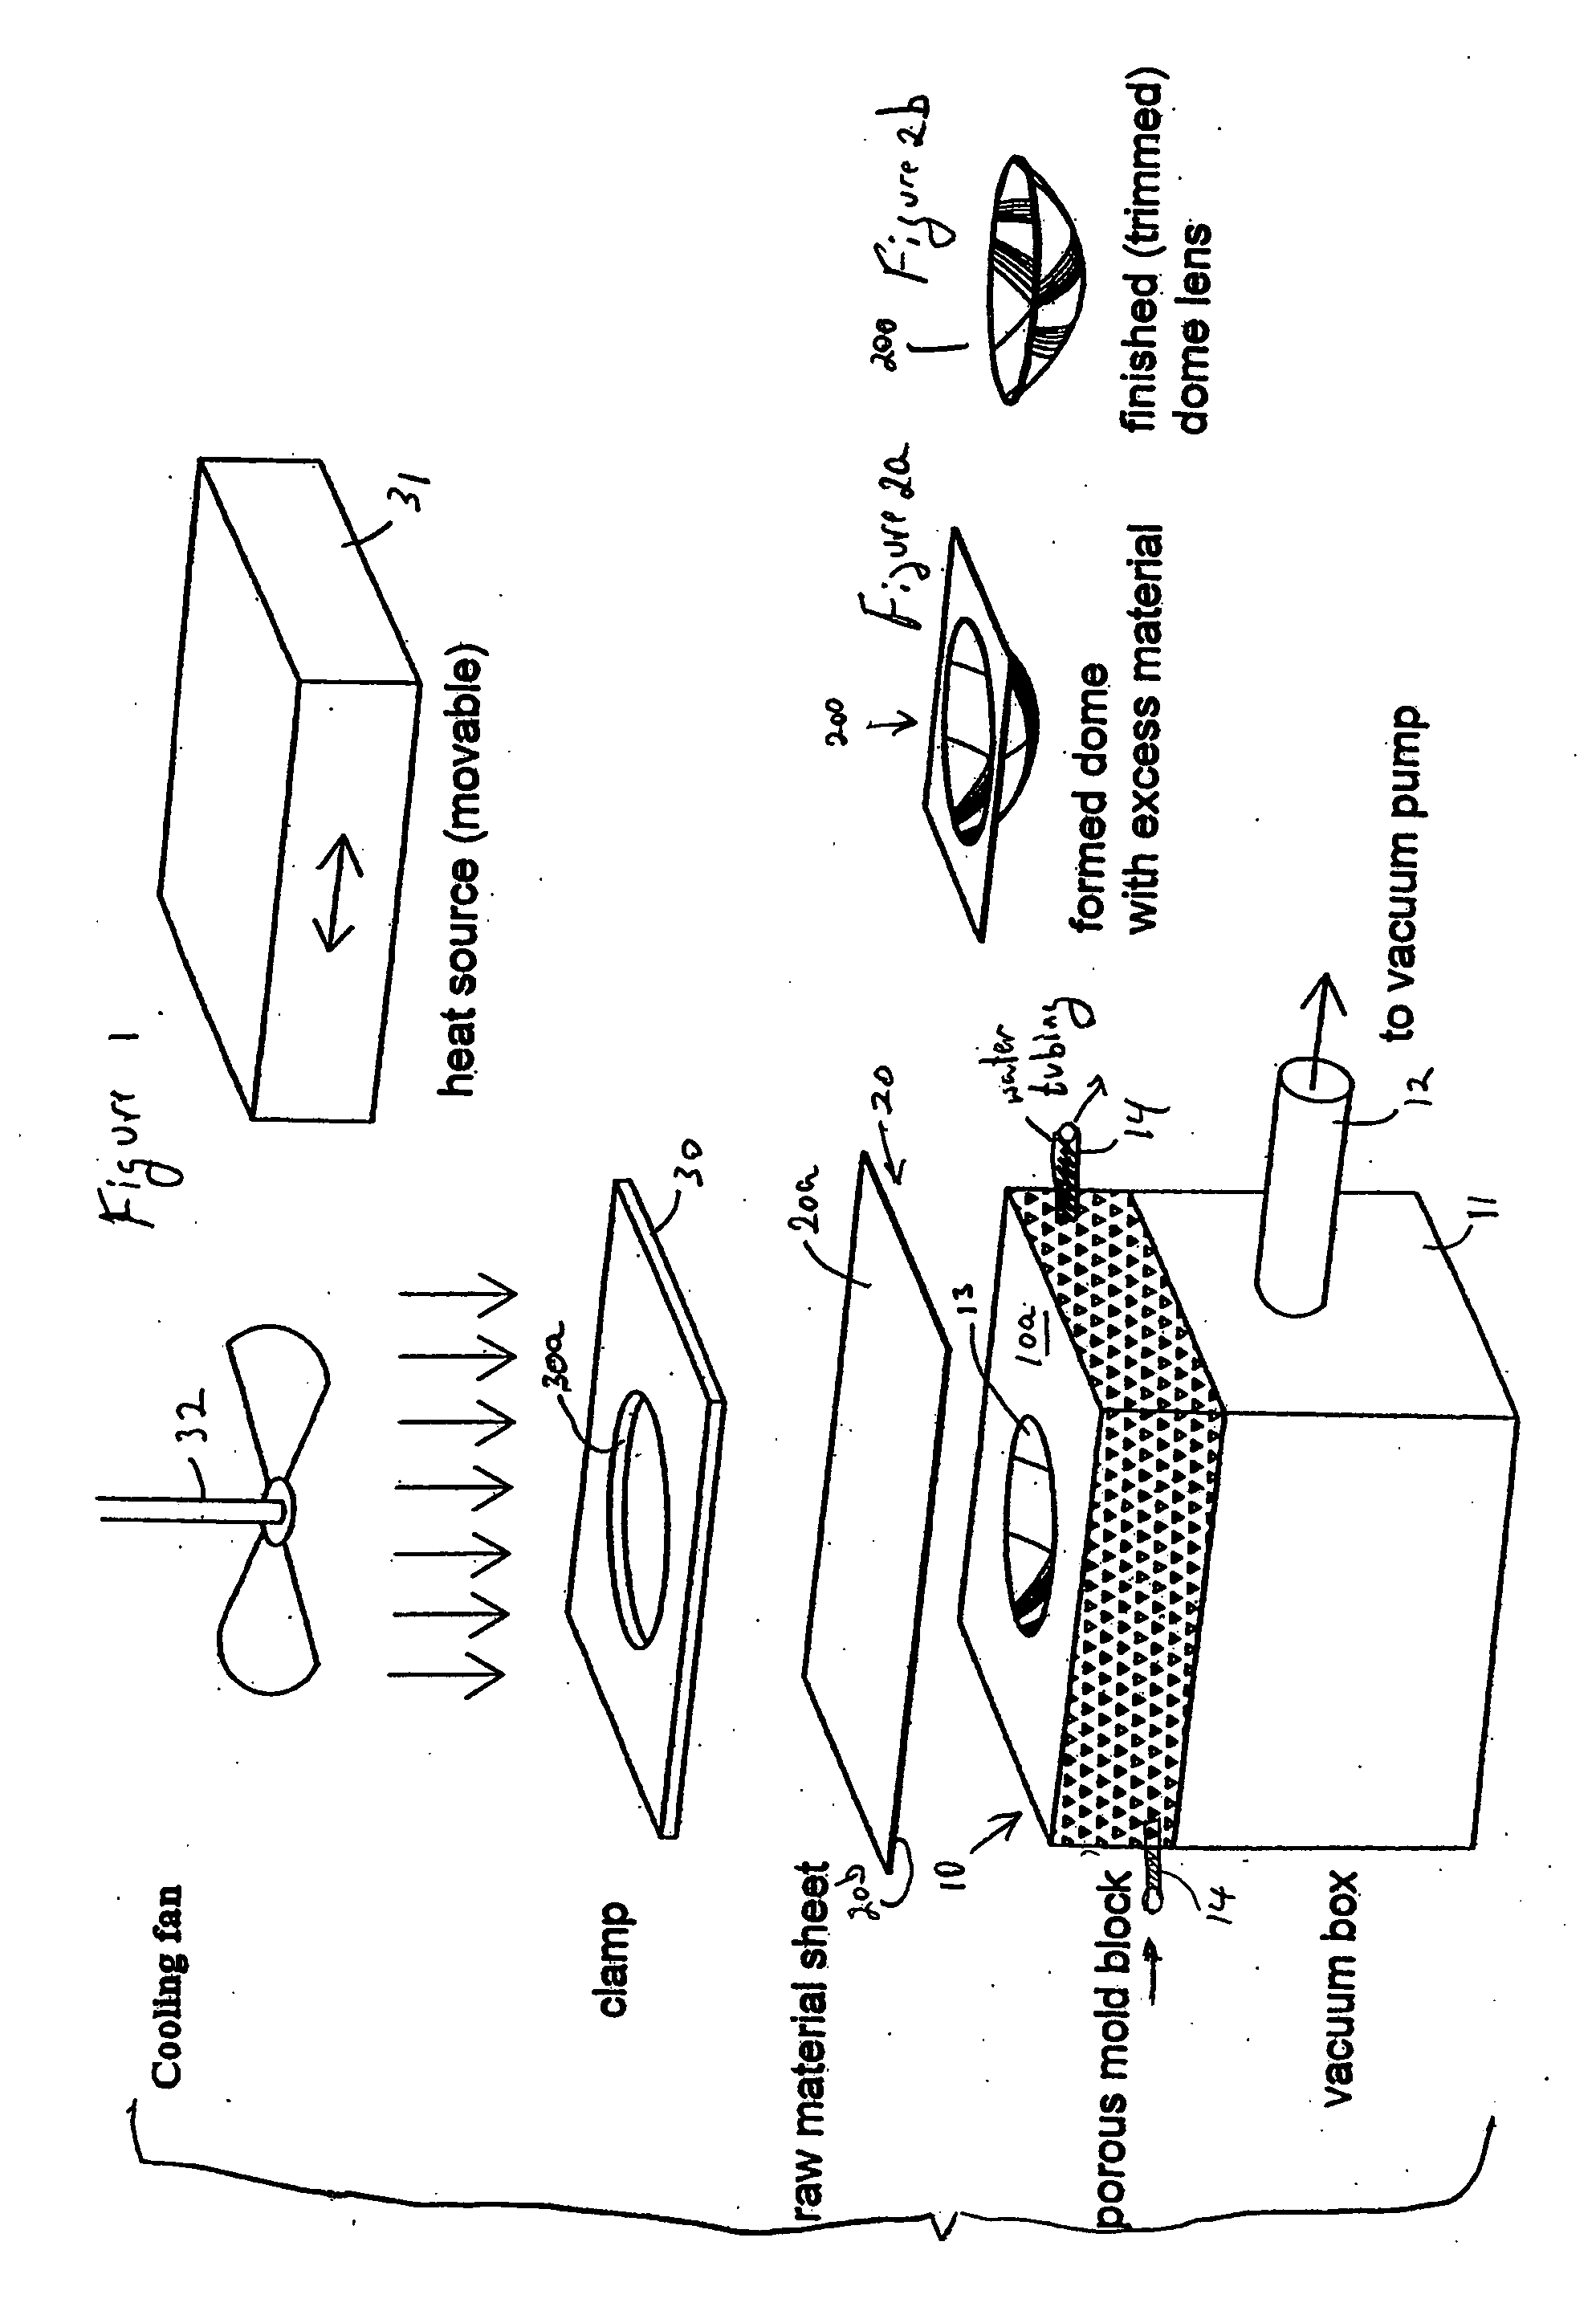 Process for thermo-molding convex mirrors